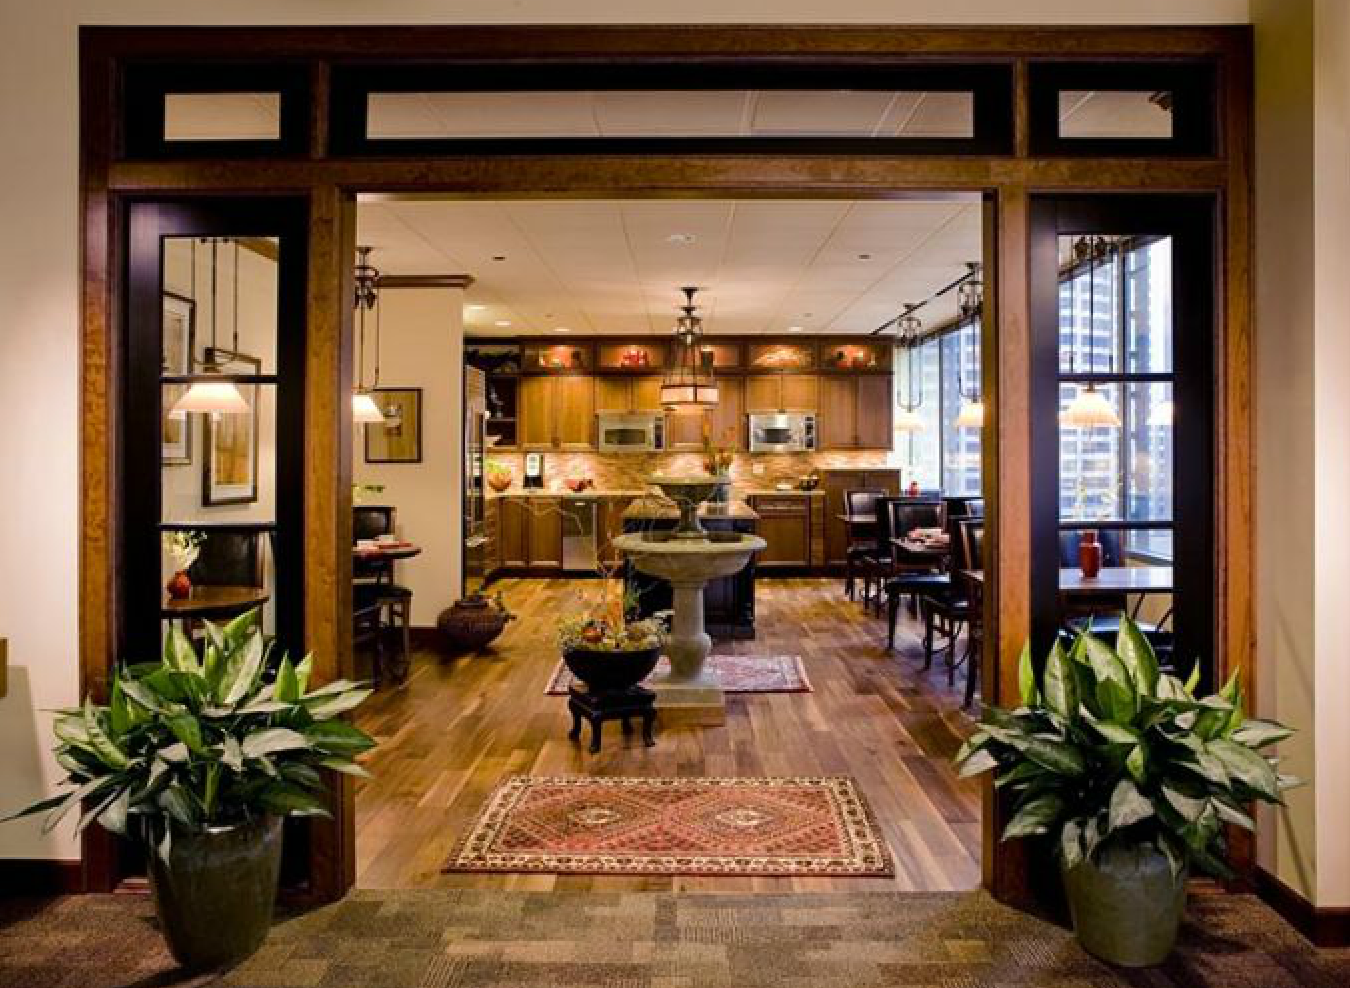 Antiques, warm woods, Asian accents and fine art reflect the finer tastes of the Chicago firm’s owner.